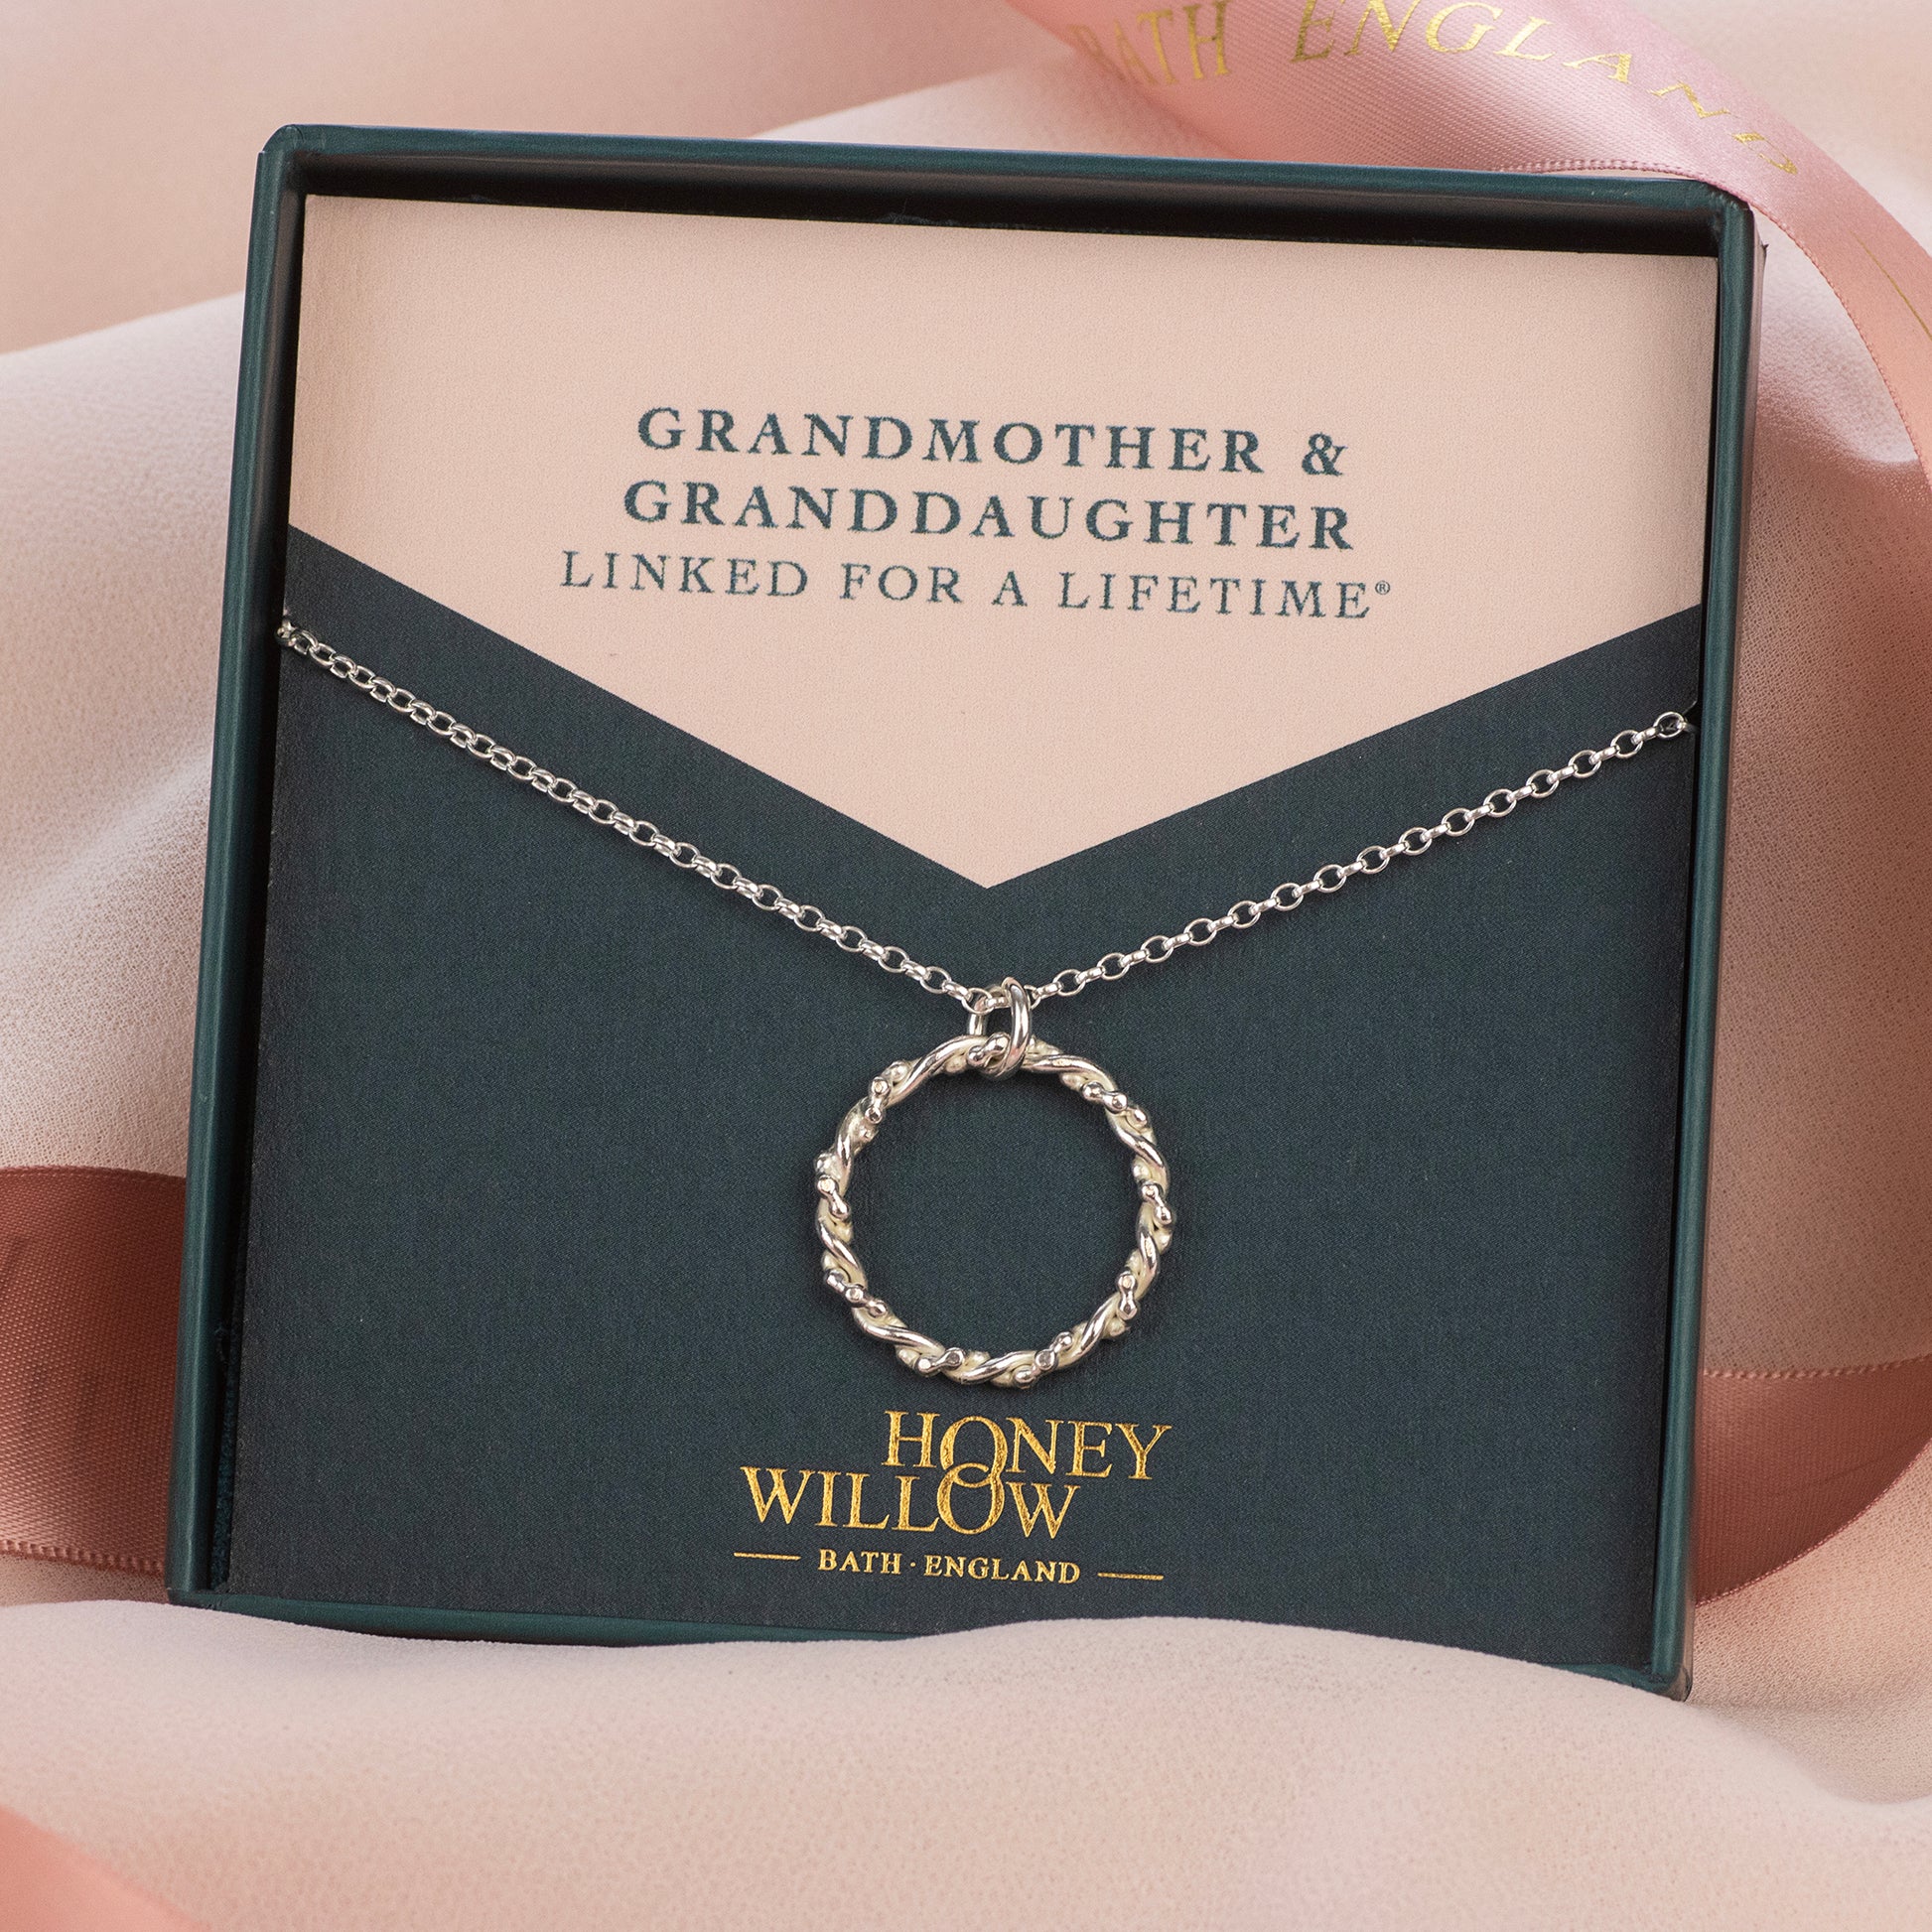 Grandmother & Granddaughter Necklace - Linked for a Lifetime - Silver Entwined Necklace